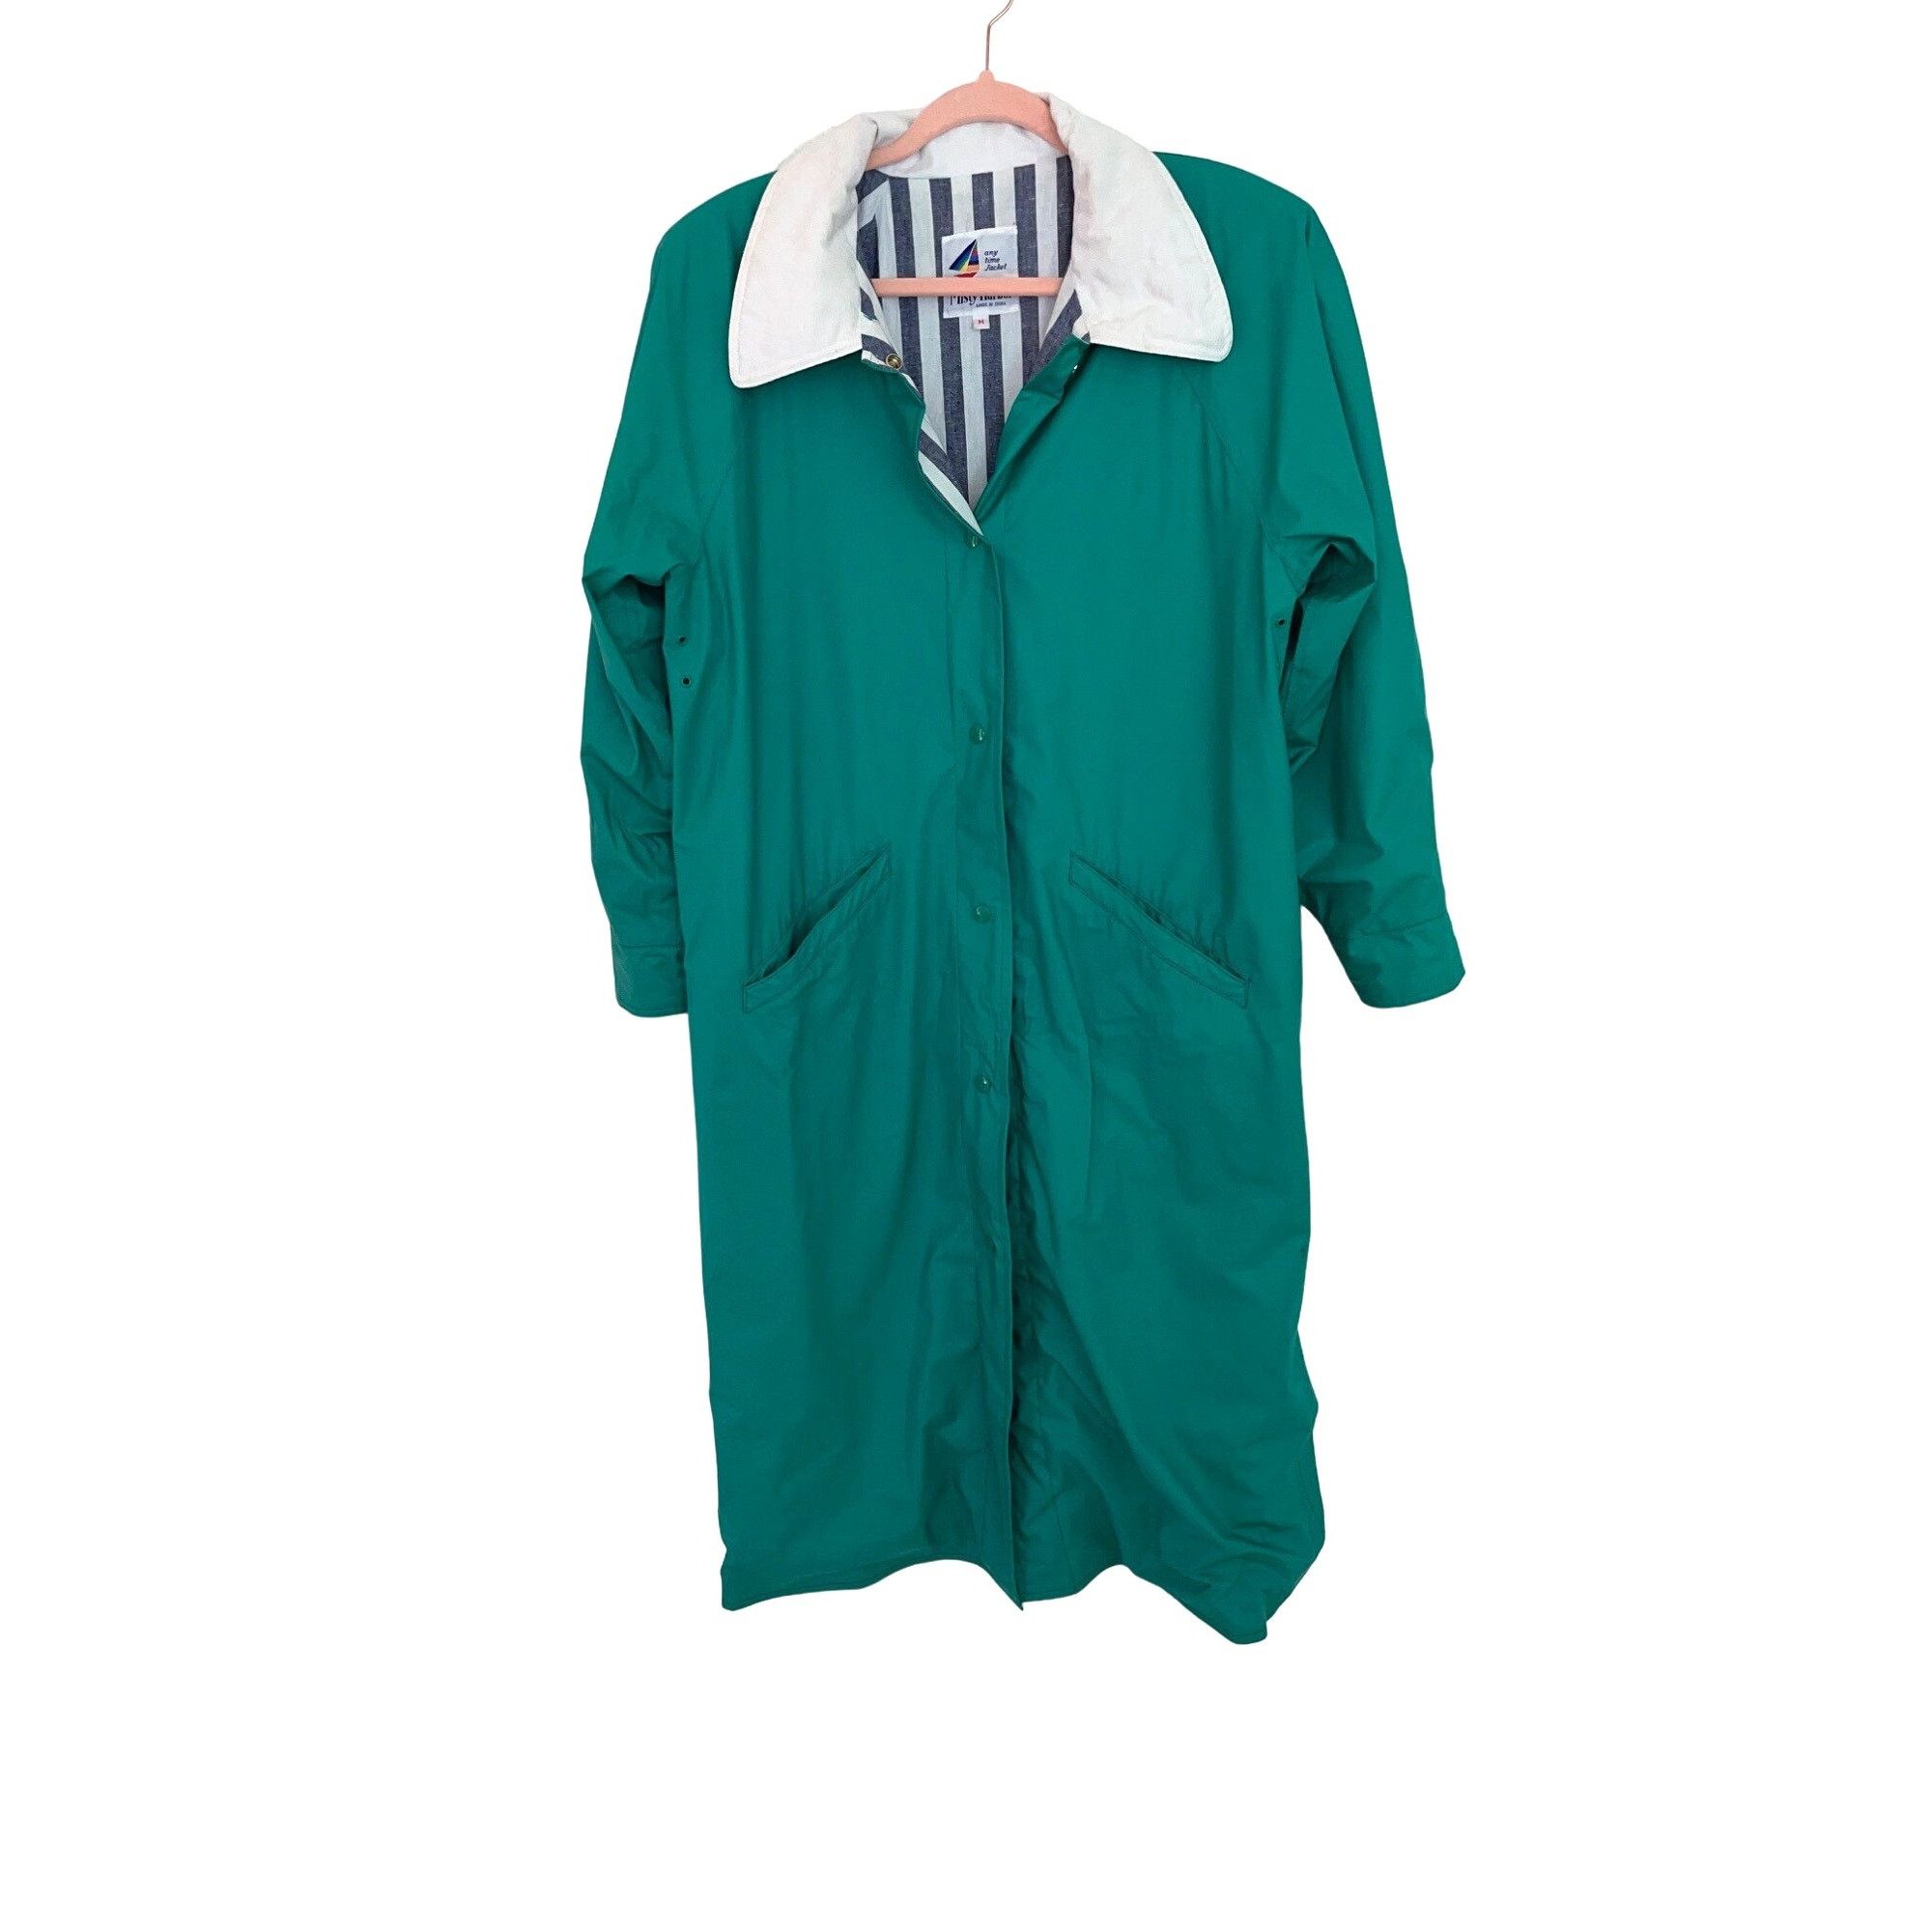 Misty Harbor Misty Harbor Any Weather Slicker Womens Raincoat Green Size L / US 10 / IT 46 - 1 Preview